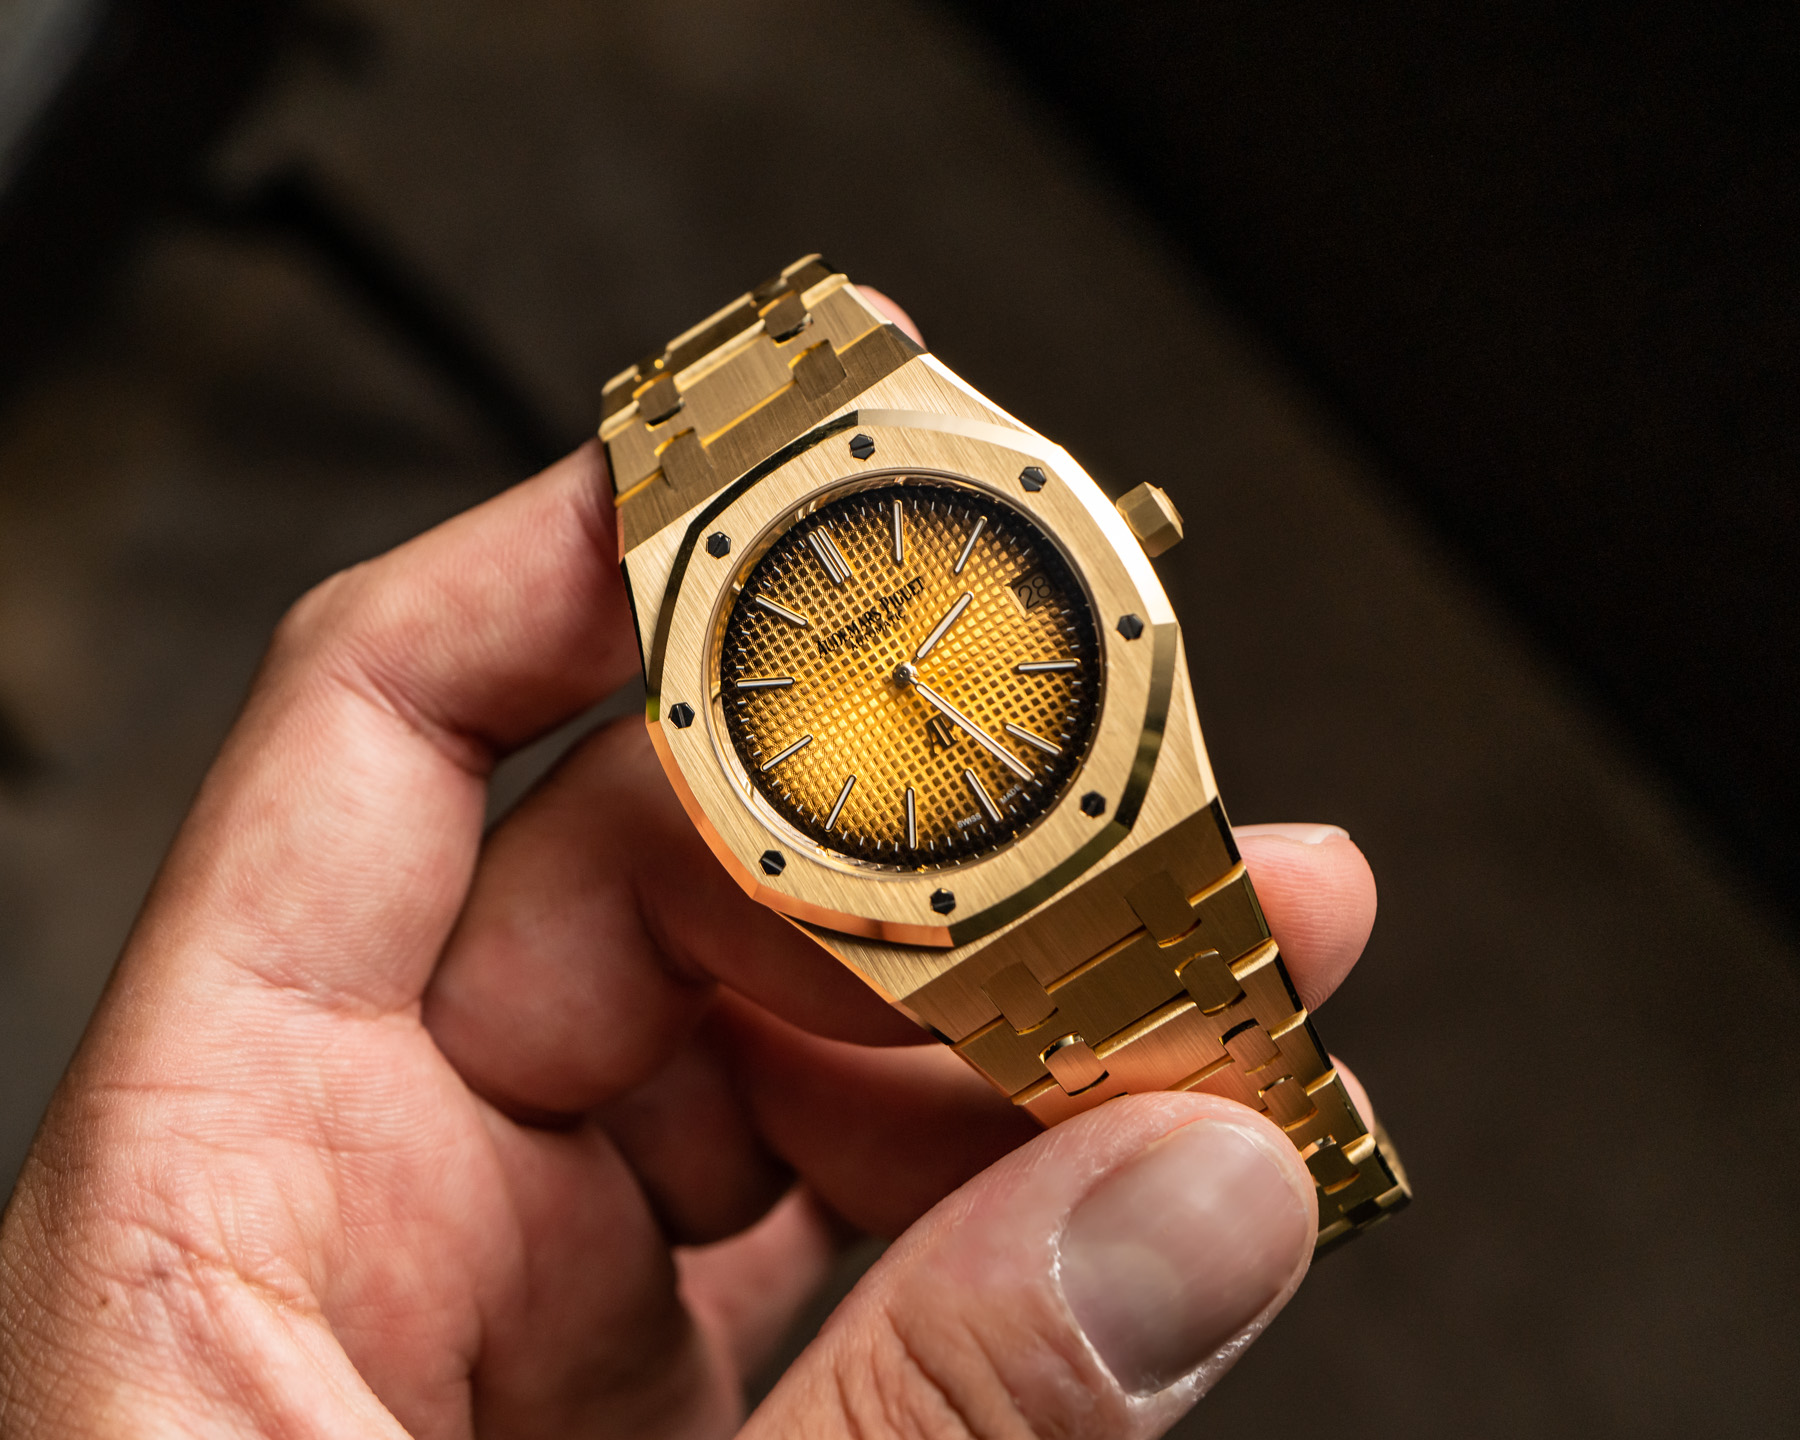 After many years… finally I got my first ever full gold Royal Oak